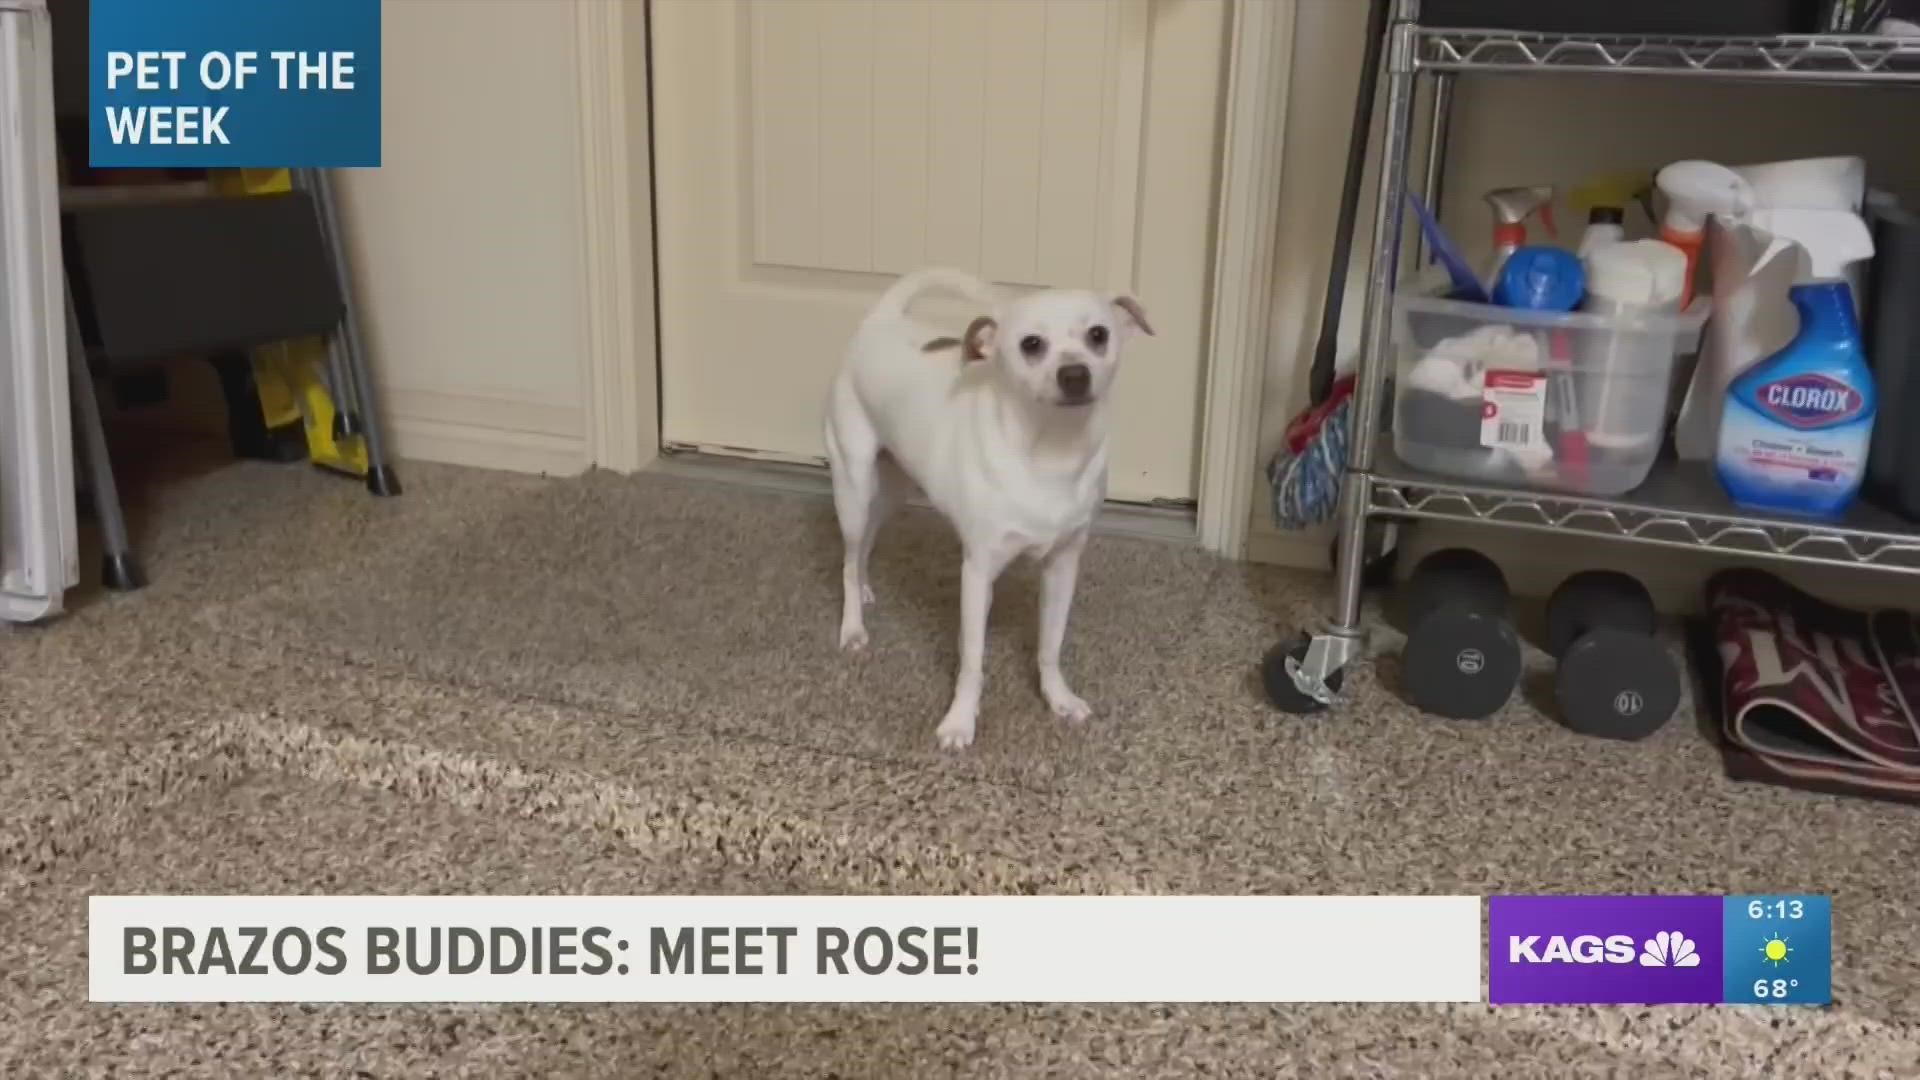 This week's featured Brazos Buddy is Rose, a four-year-old Chihuahua mix that's looking to be adopted.